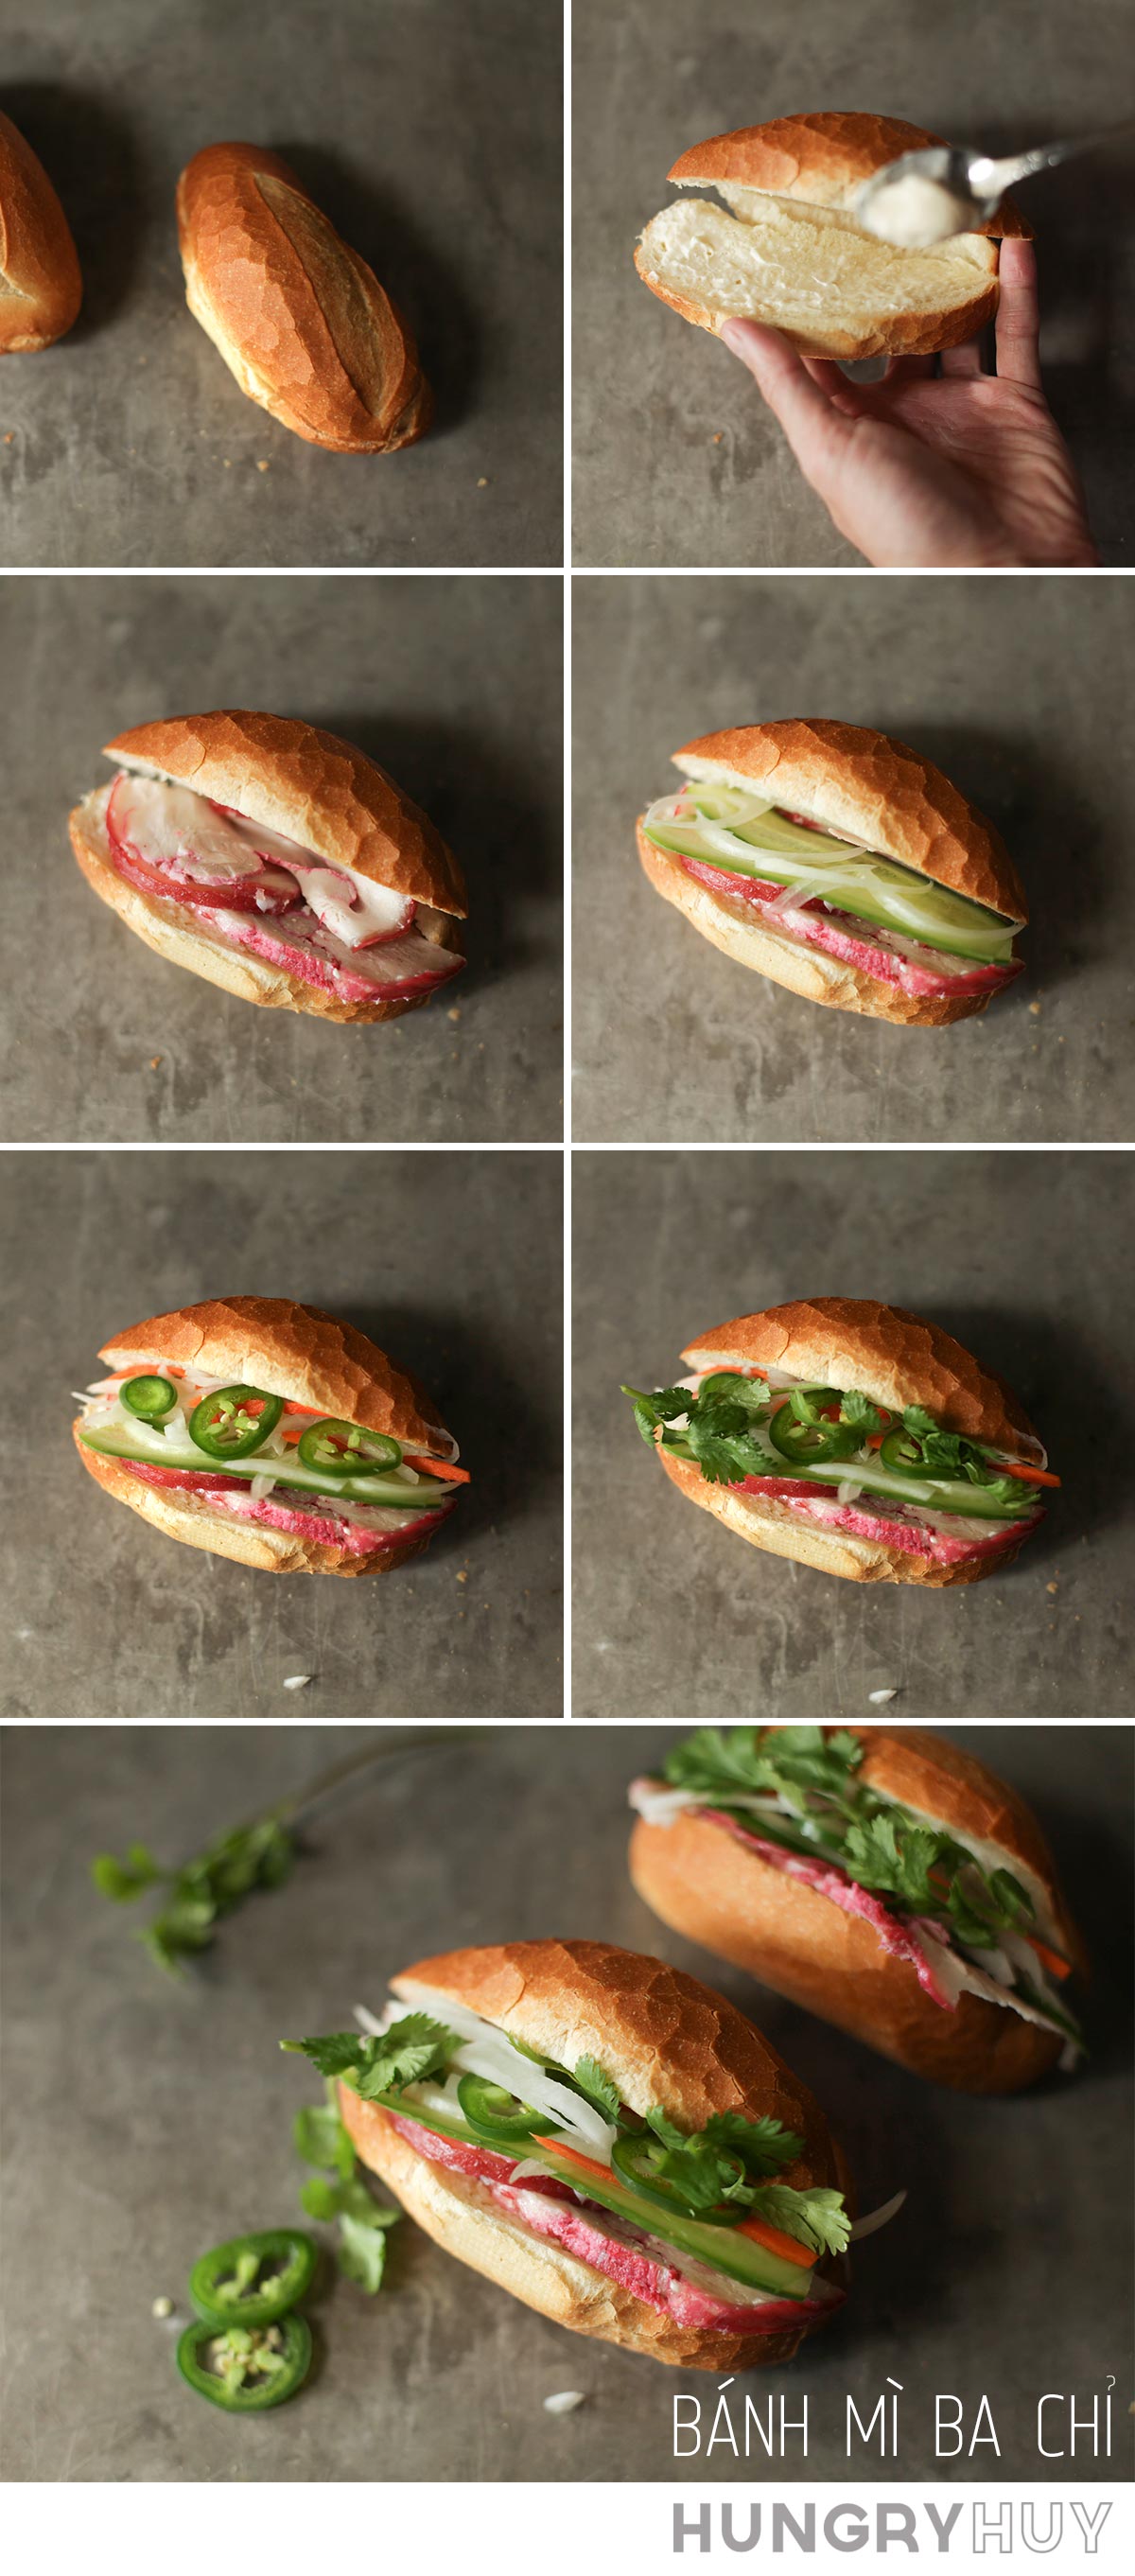 banh mi recipe - a step by step pictorial